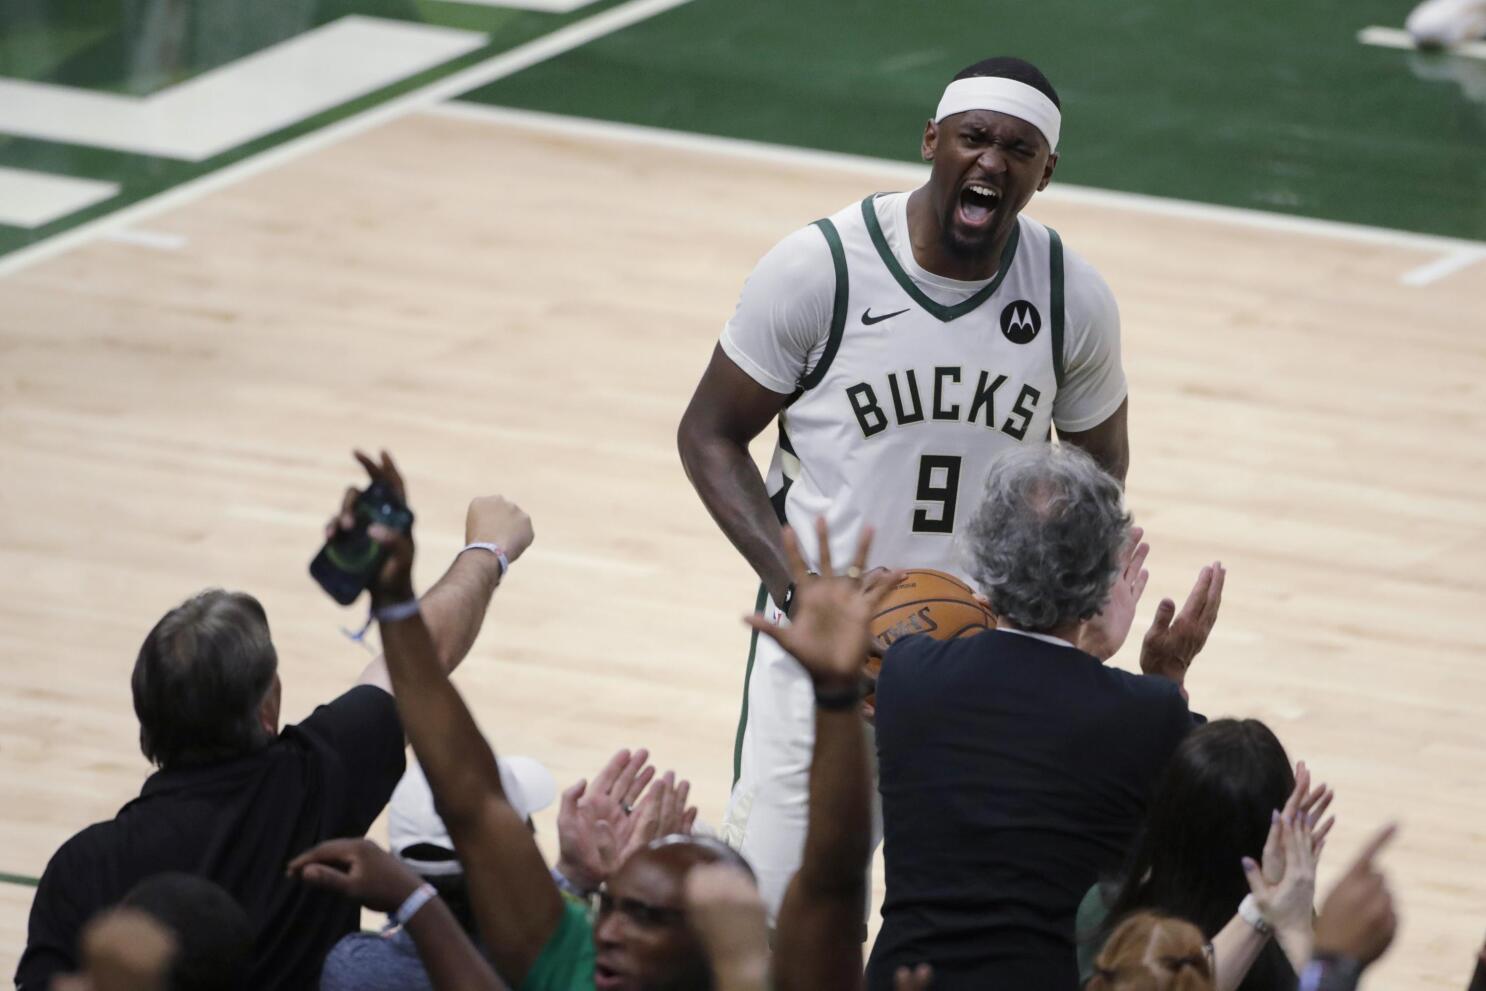 Journal Sentinel on X: In two short years, Bucks fan favorite Bobby Portis  has found himself feeling at home in Milwaukee. So much so that he's  convinced his younger brothers to move